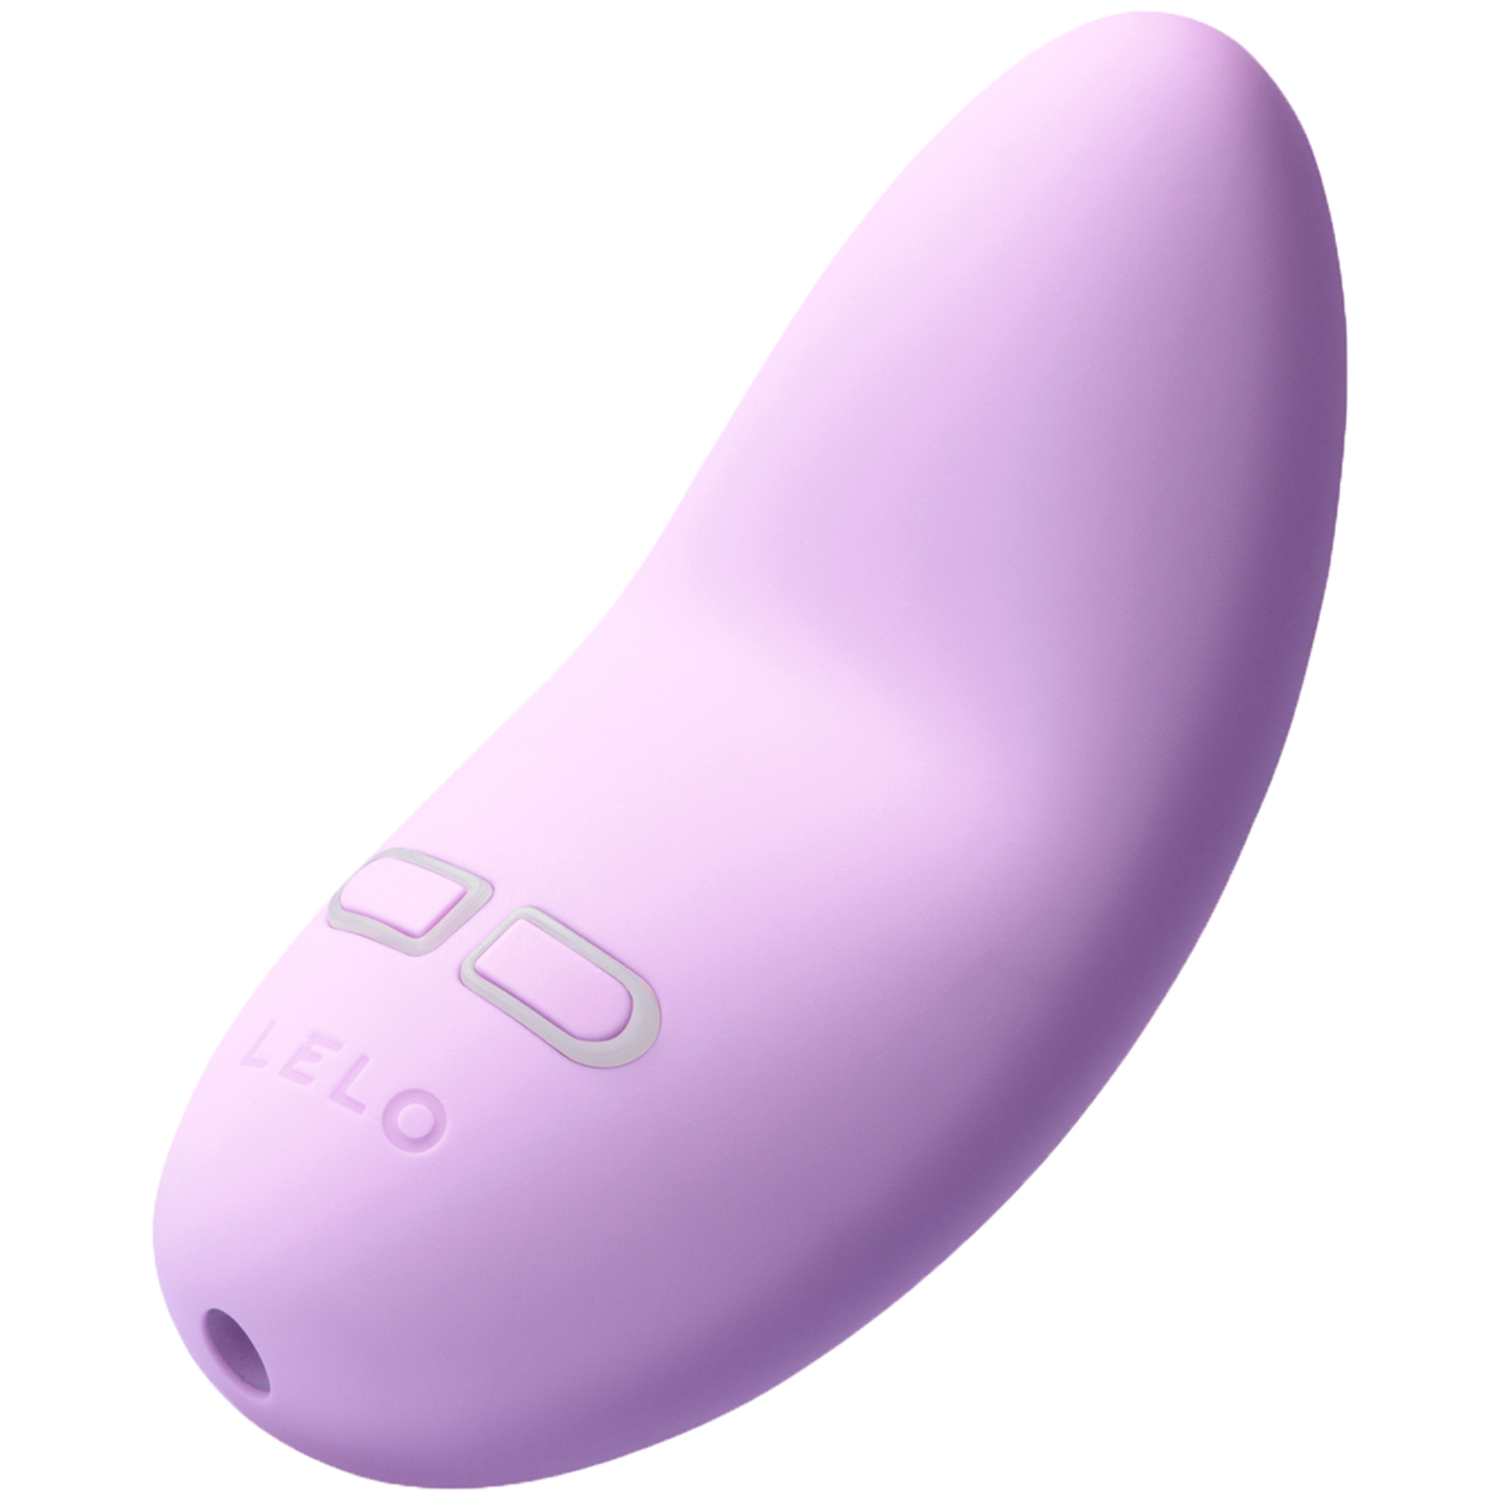 LELO LILY 2 Personal Massager - Rose